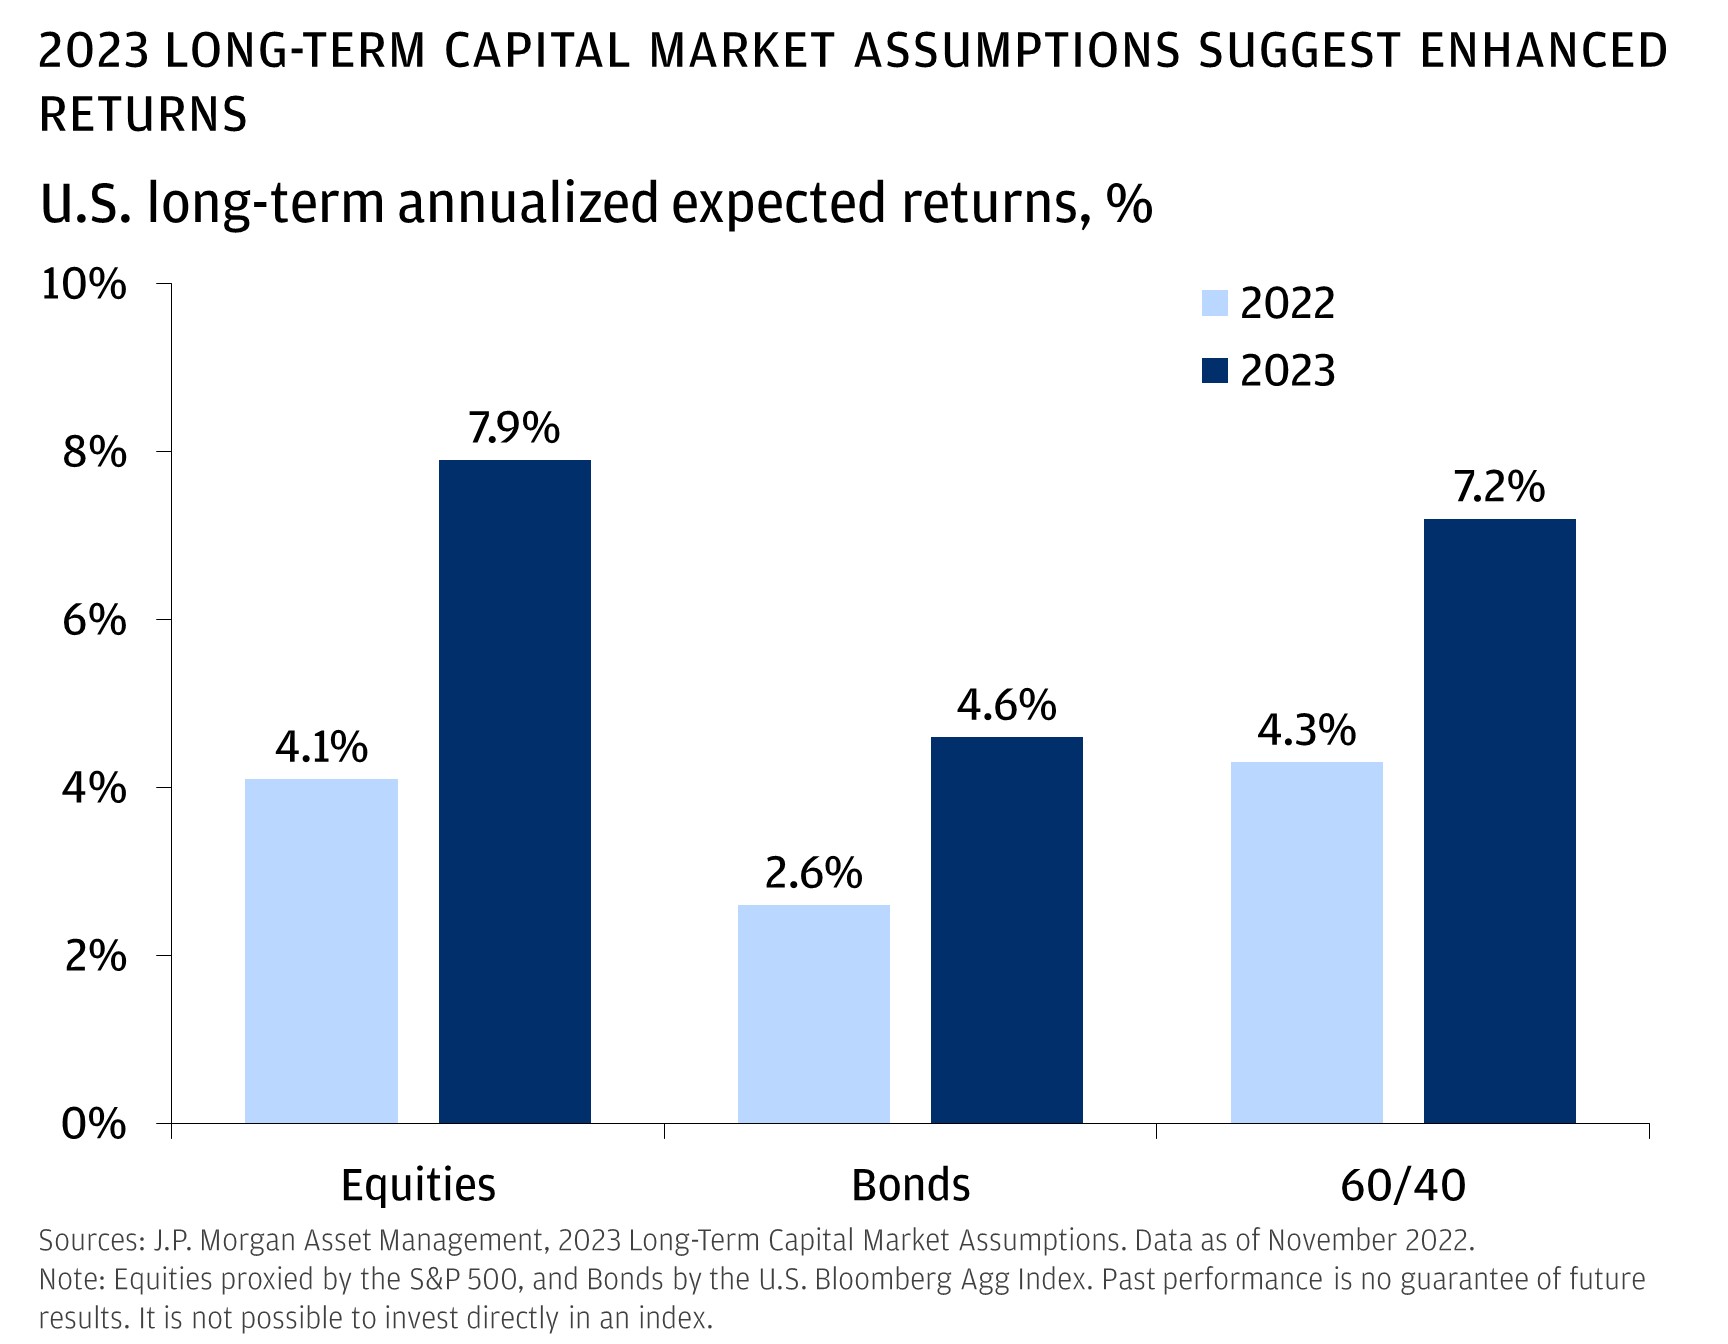 This chart shows the Long-Term Capital Market Assumptions (long-term annualized expected returns) in 2022 and 2023 for equities, bonds and a 60/40 portfolio.